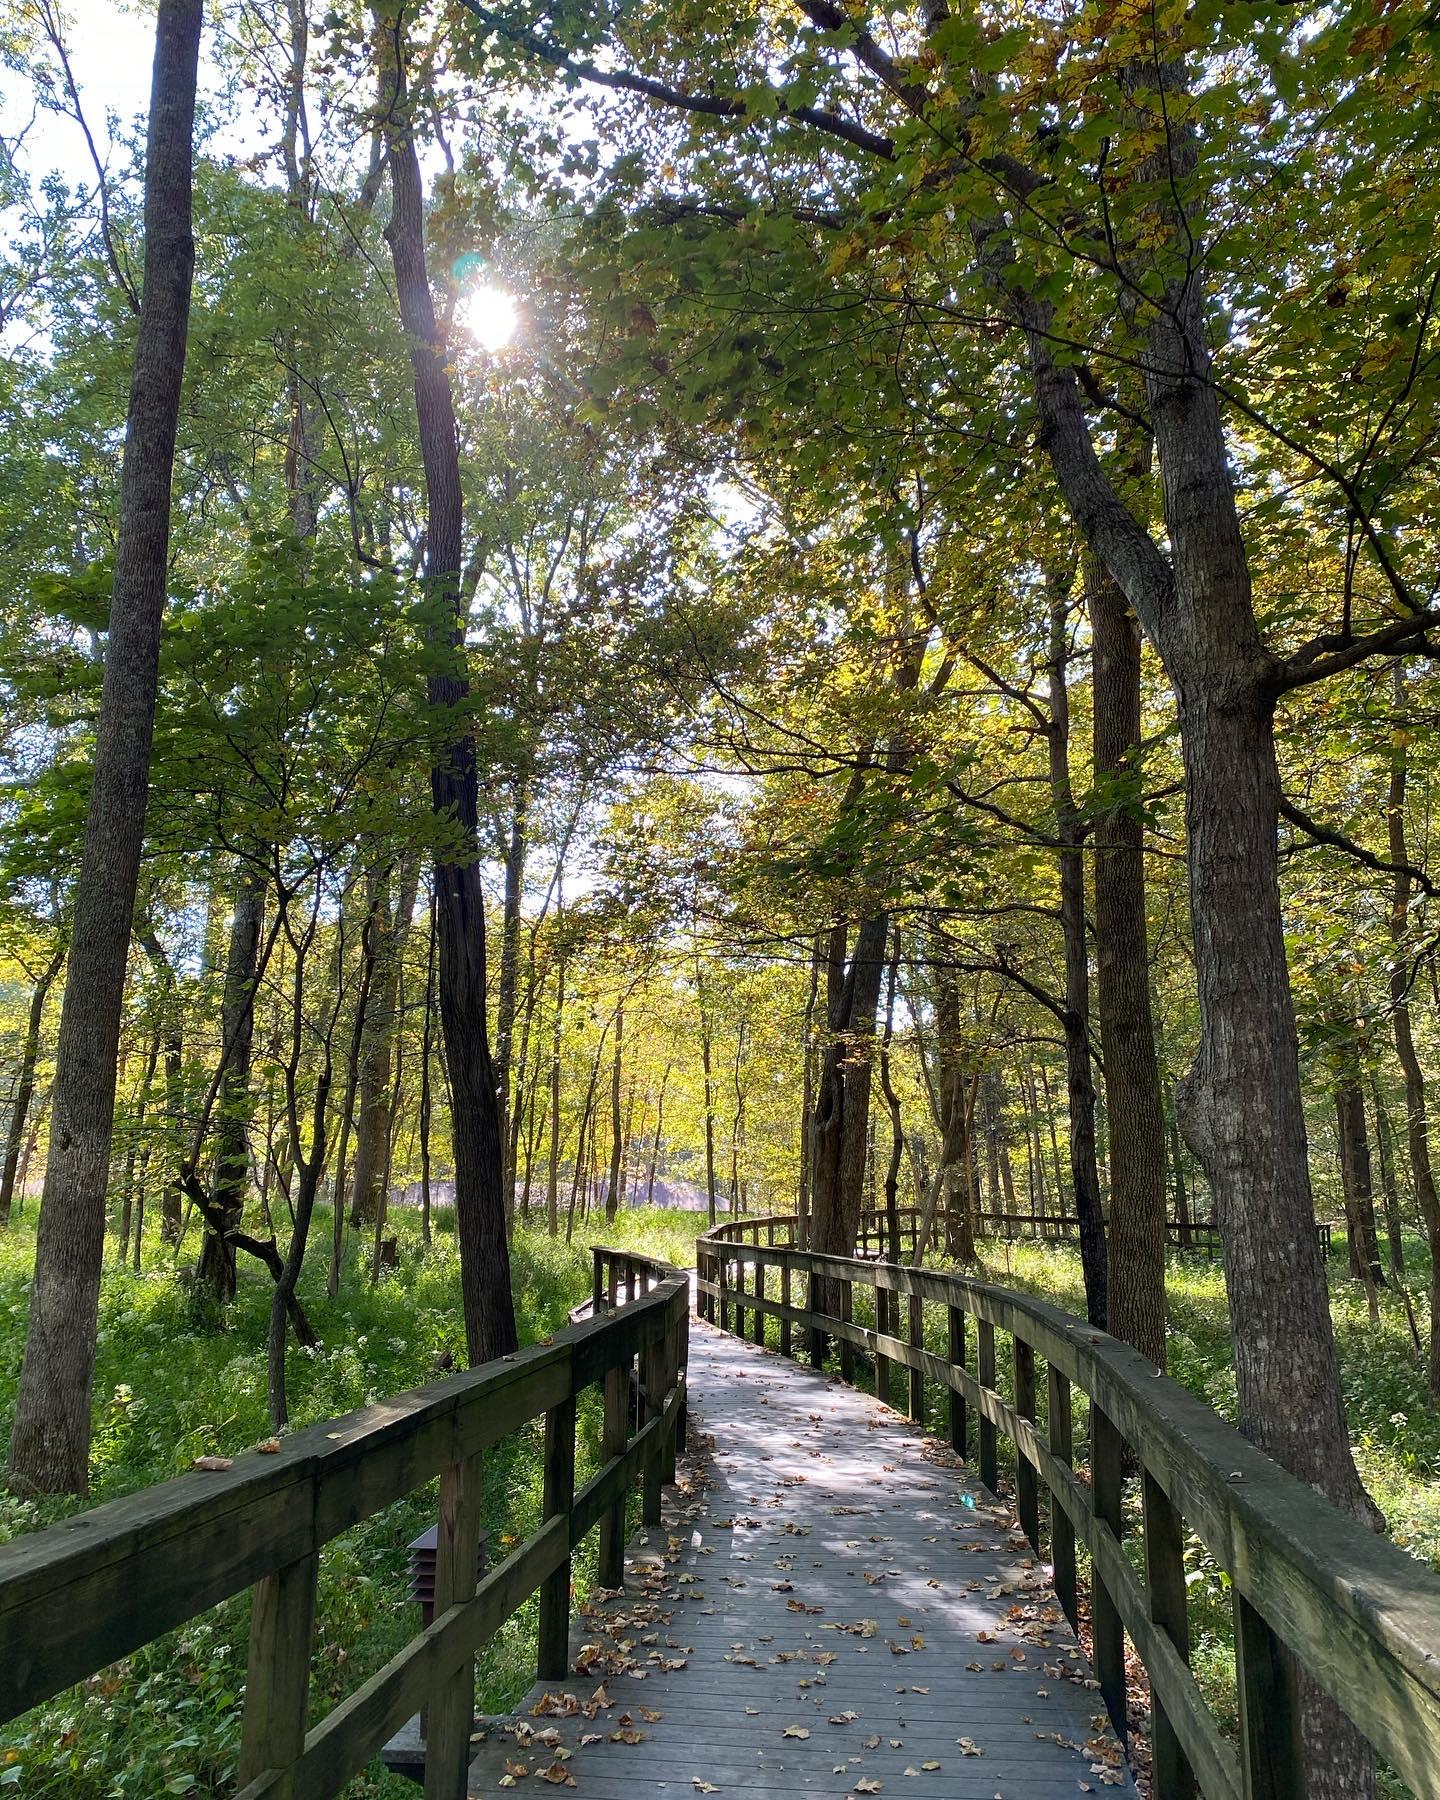 A wooden boardwalk leads into the forest.